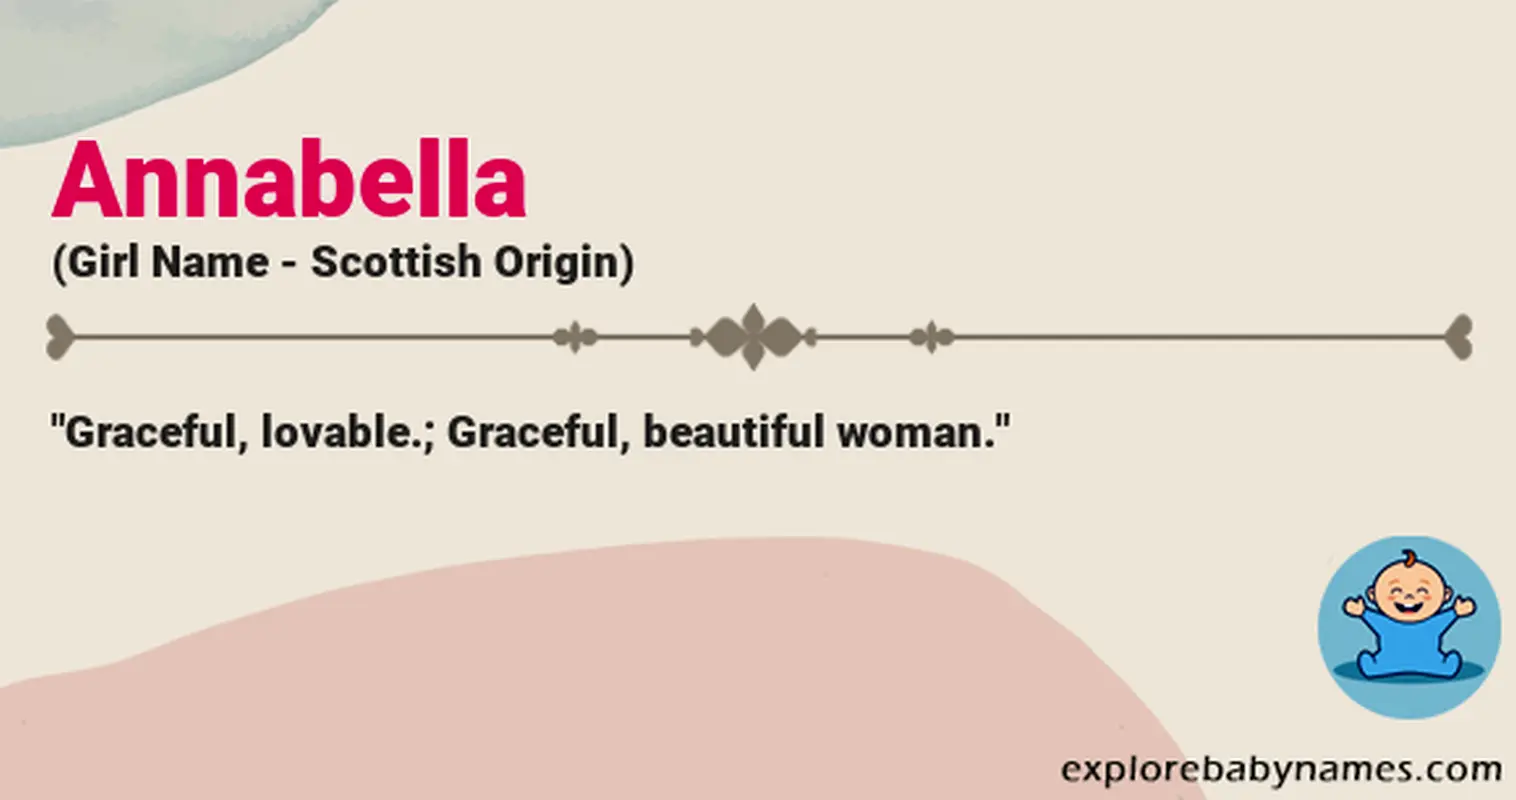 Meaning of Annabella